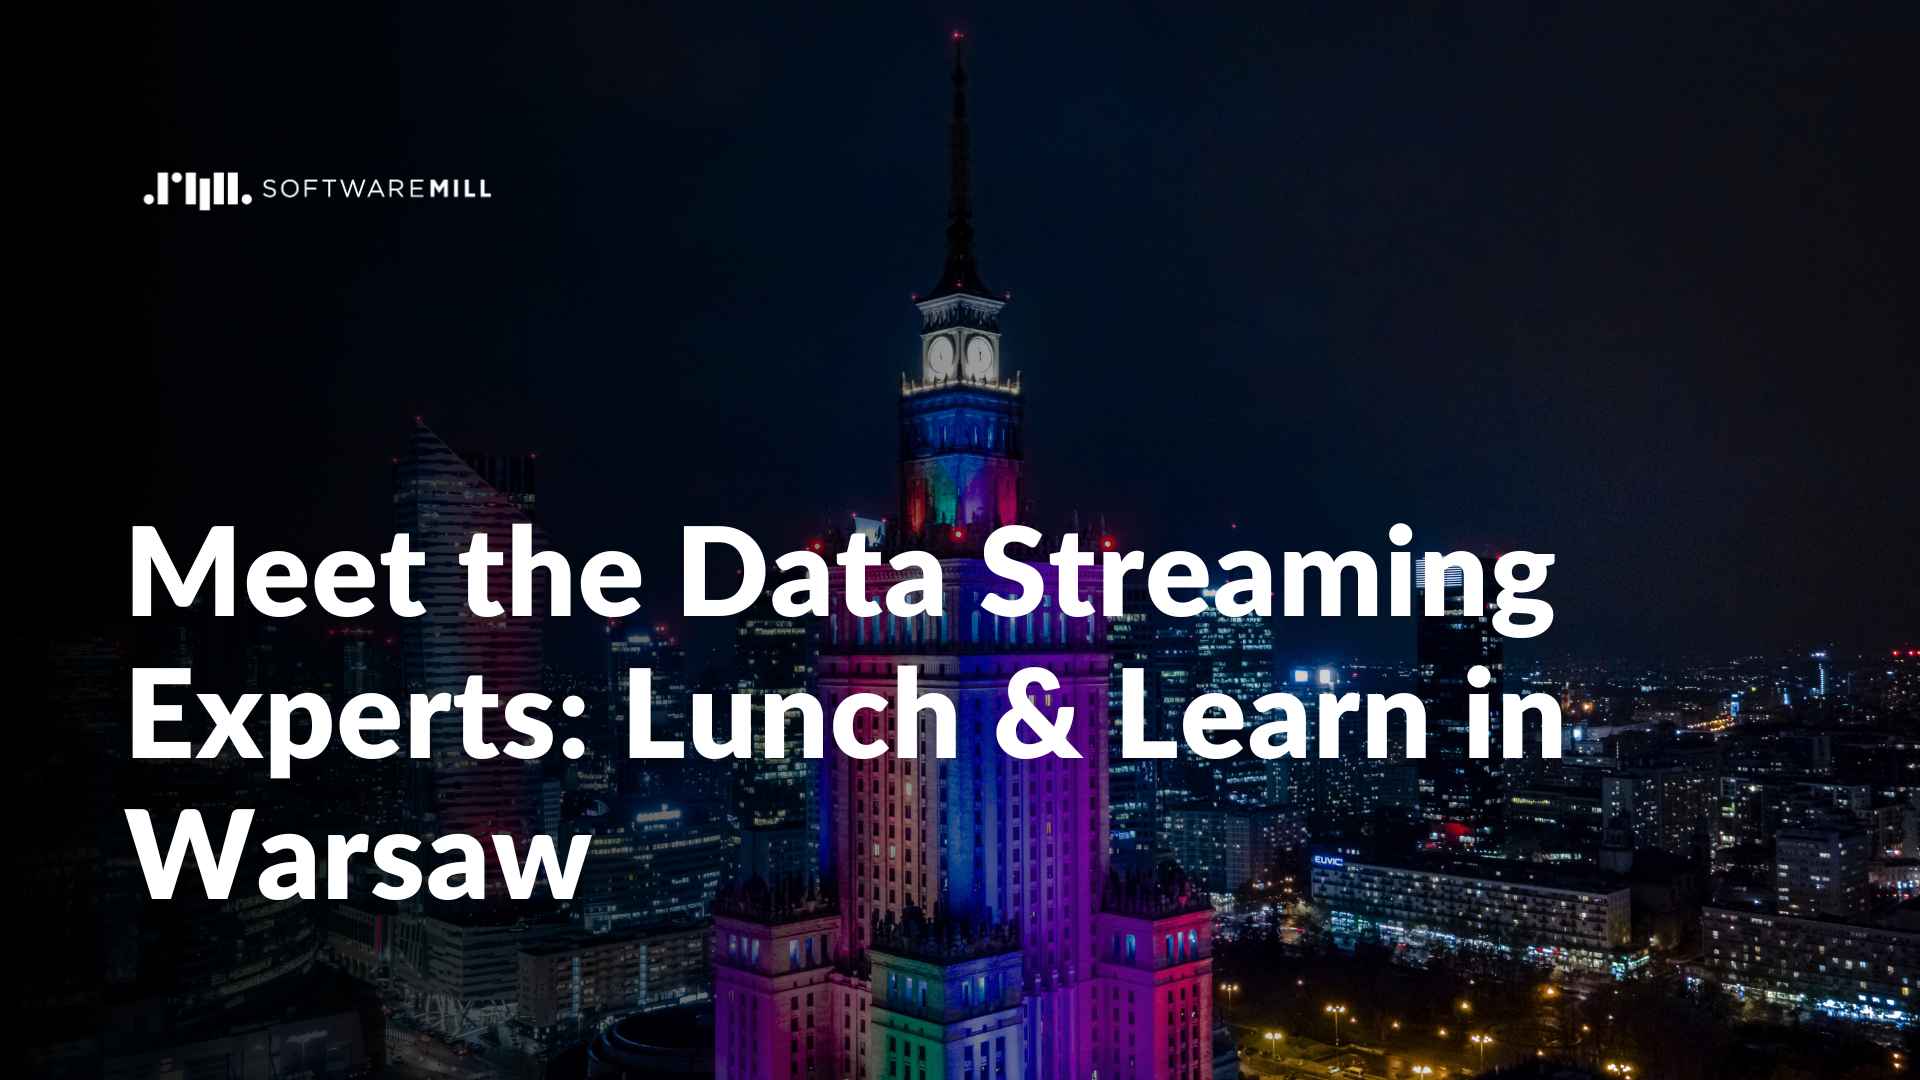 Meet the Data Streaming Experts: Lunch & Learn in Warsaw meetup webp image